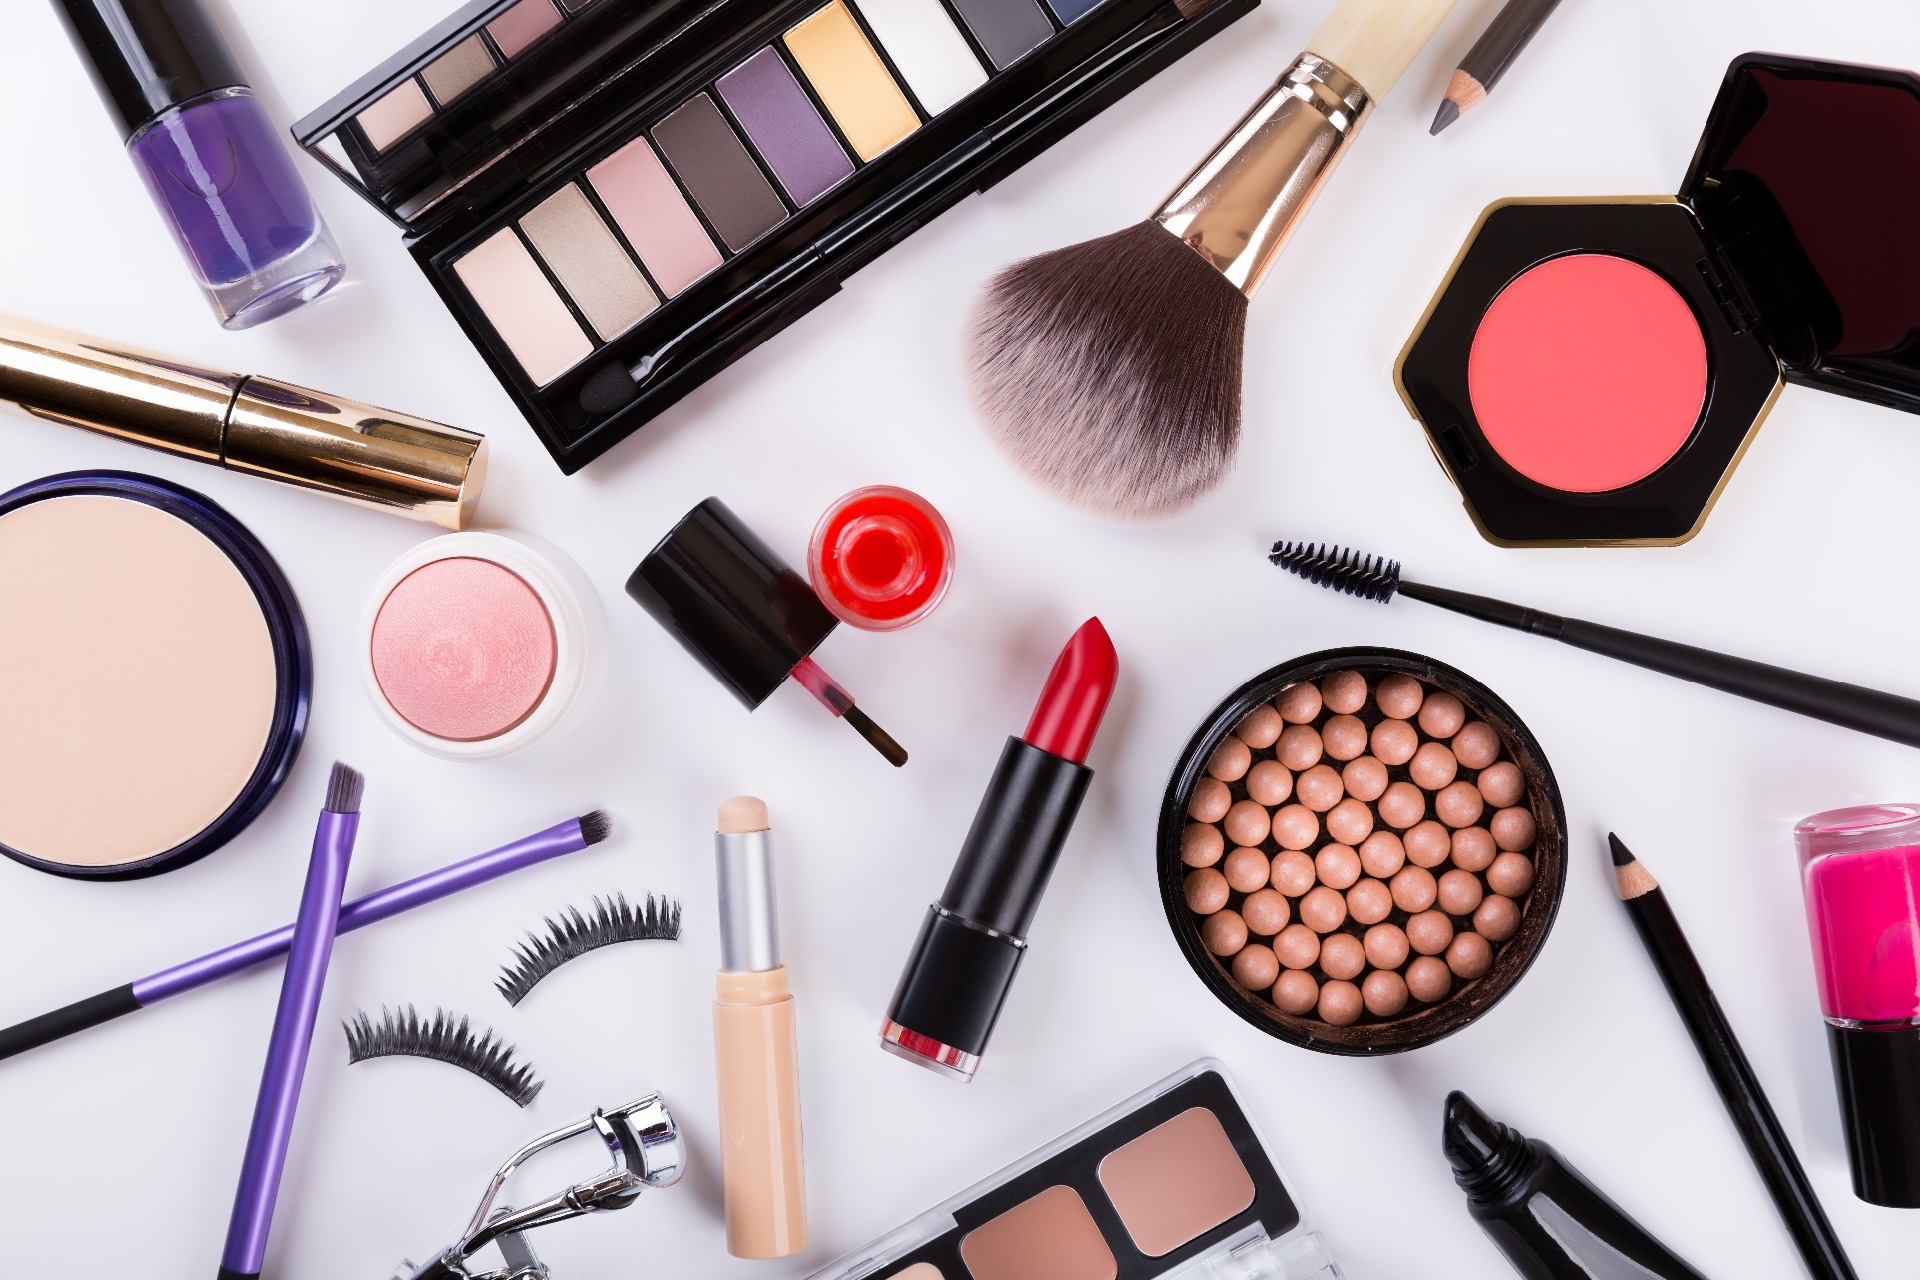 An array of beauty products, such as mascara, eyeliner, eyeshadow, blush, foundation and eyelashes.